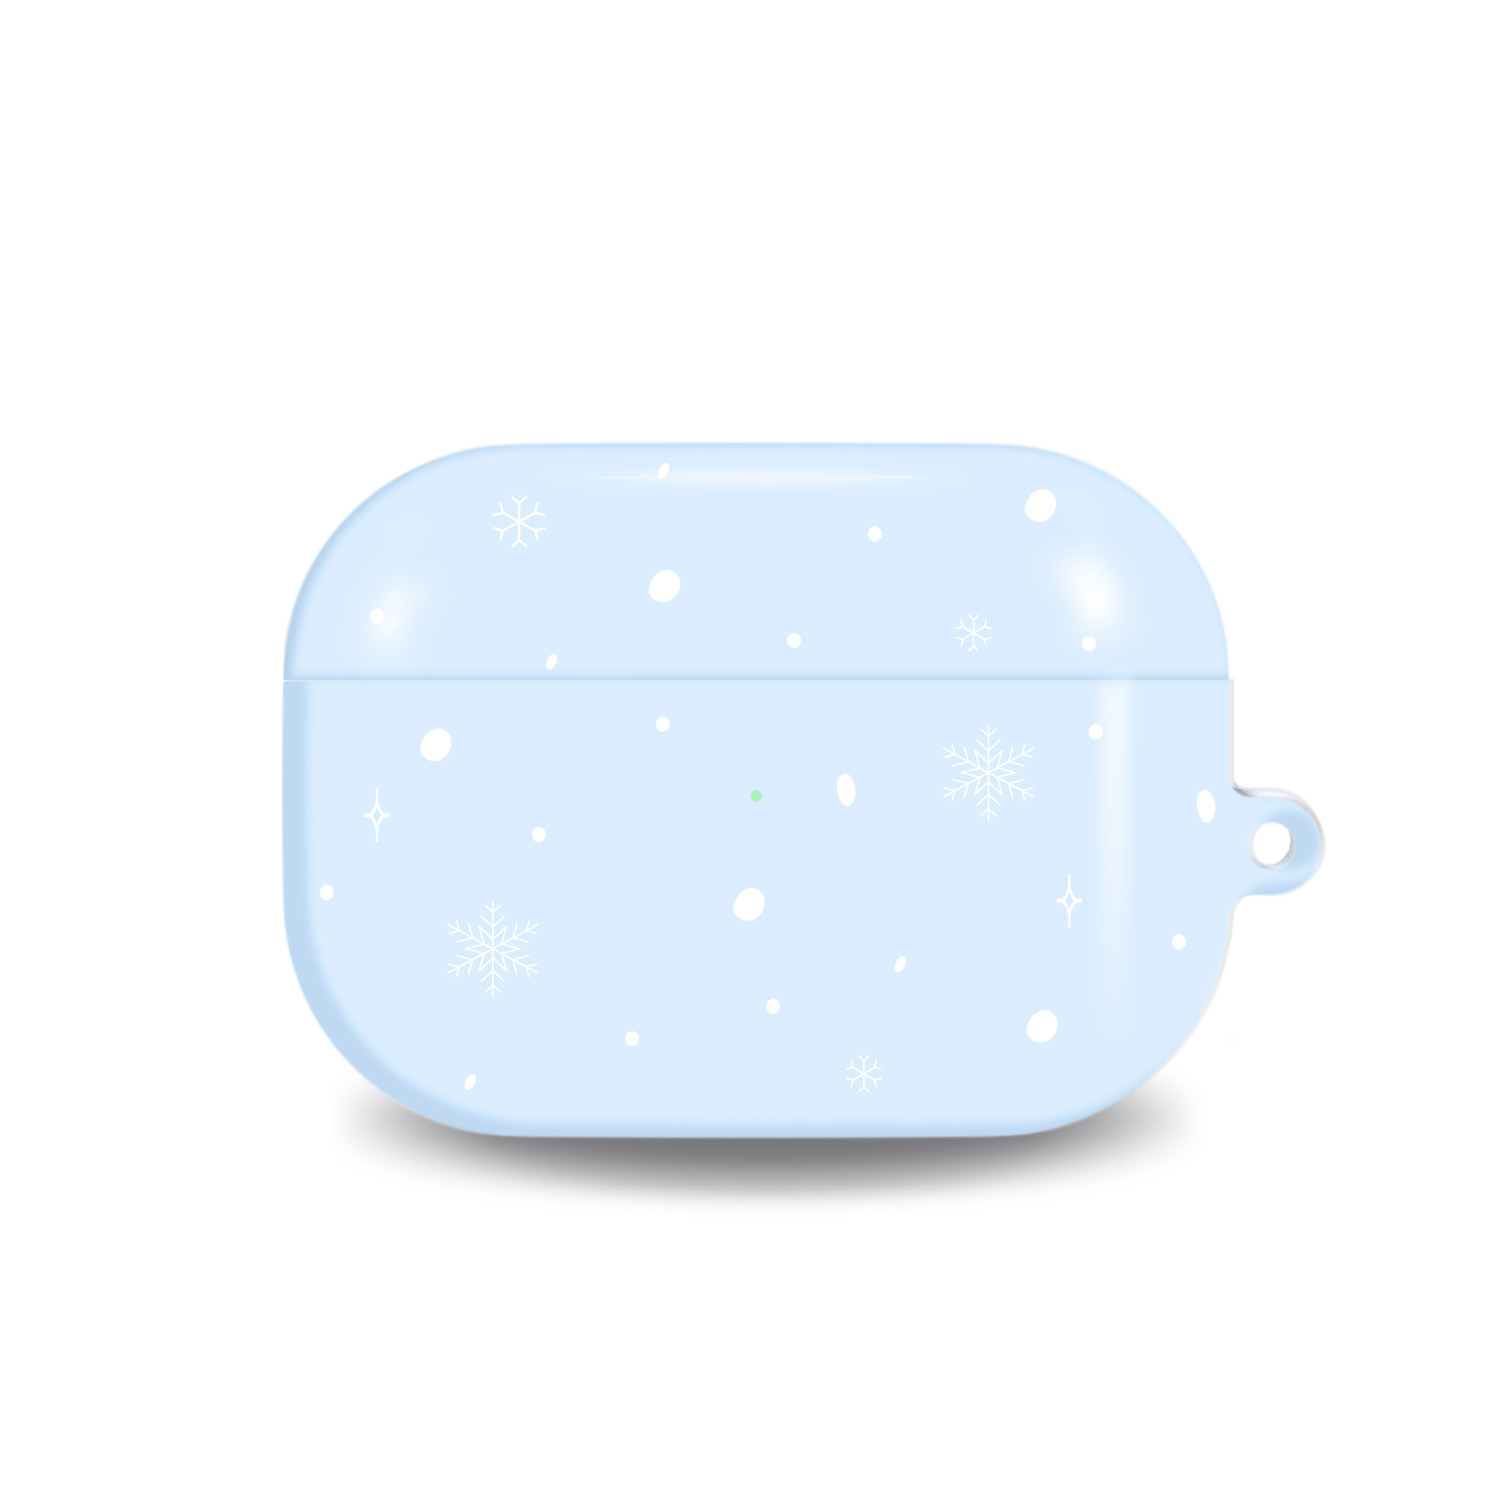 [airpods case] Let it snow _blue airpods case